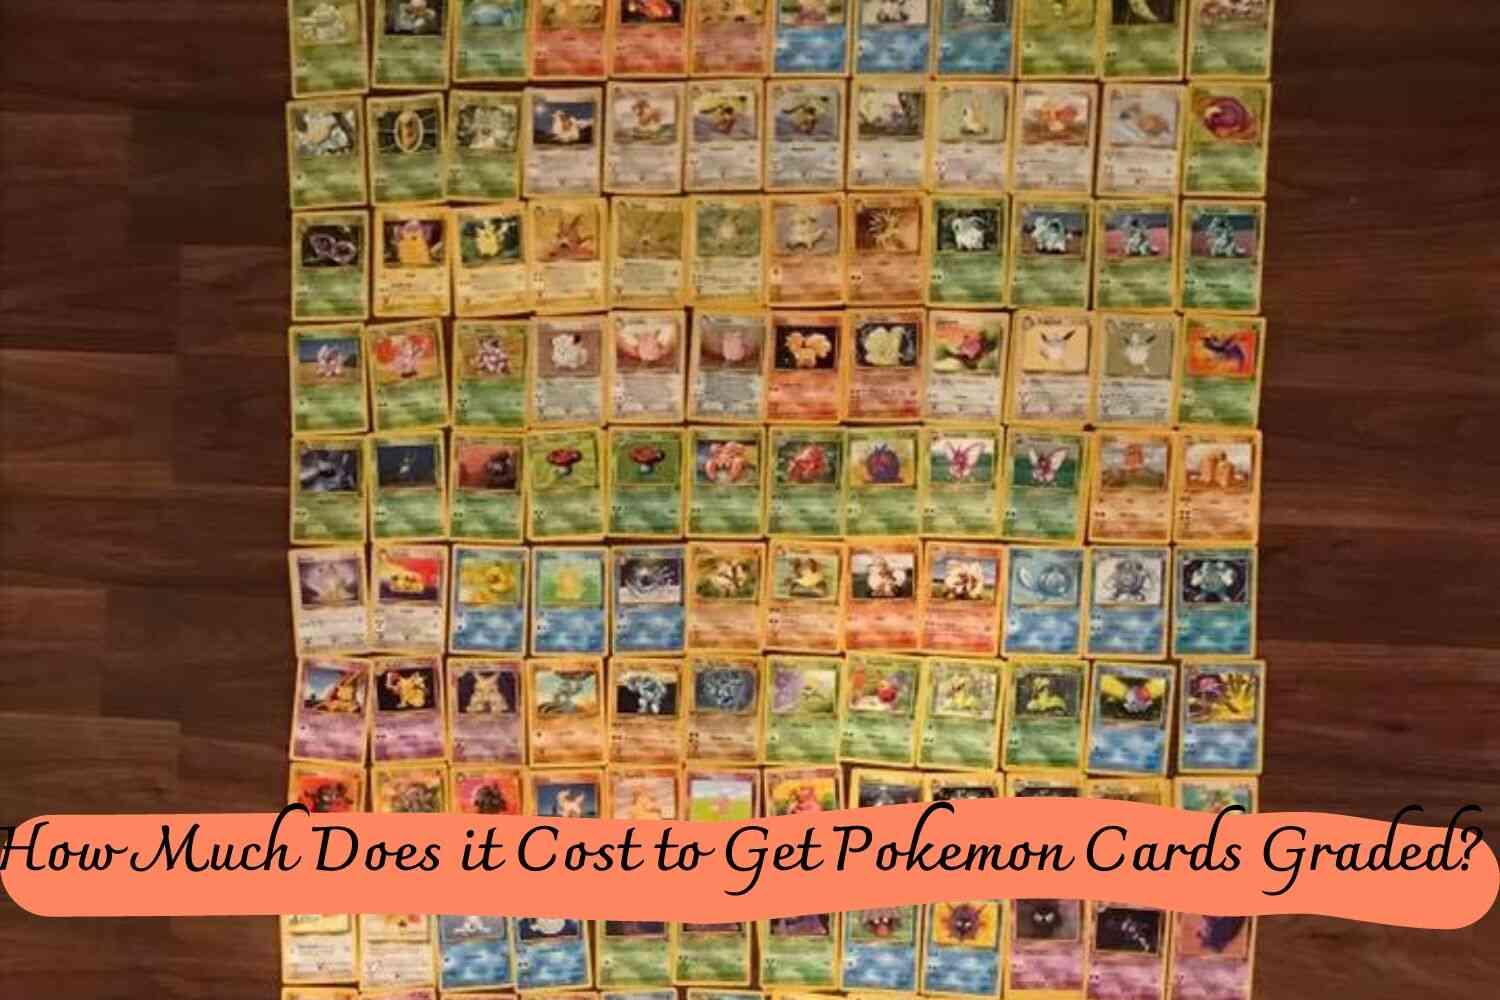 How Much Does it Cost to Get Pokemon Cards Graded?